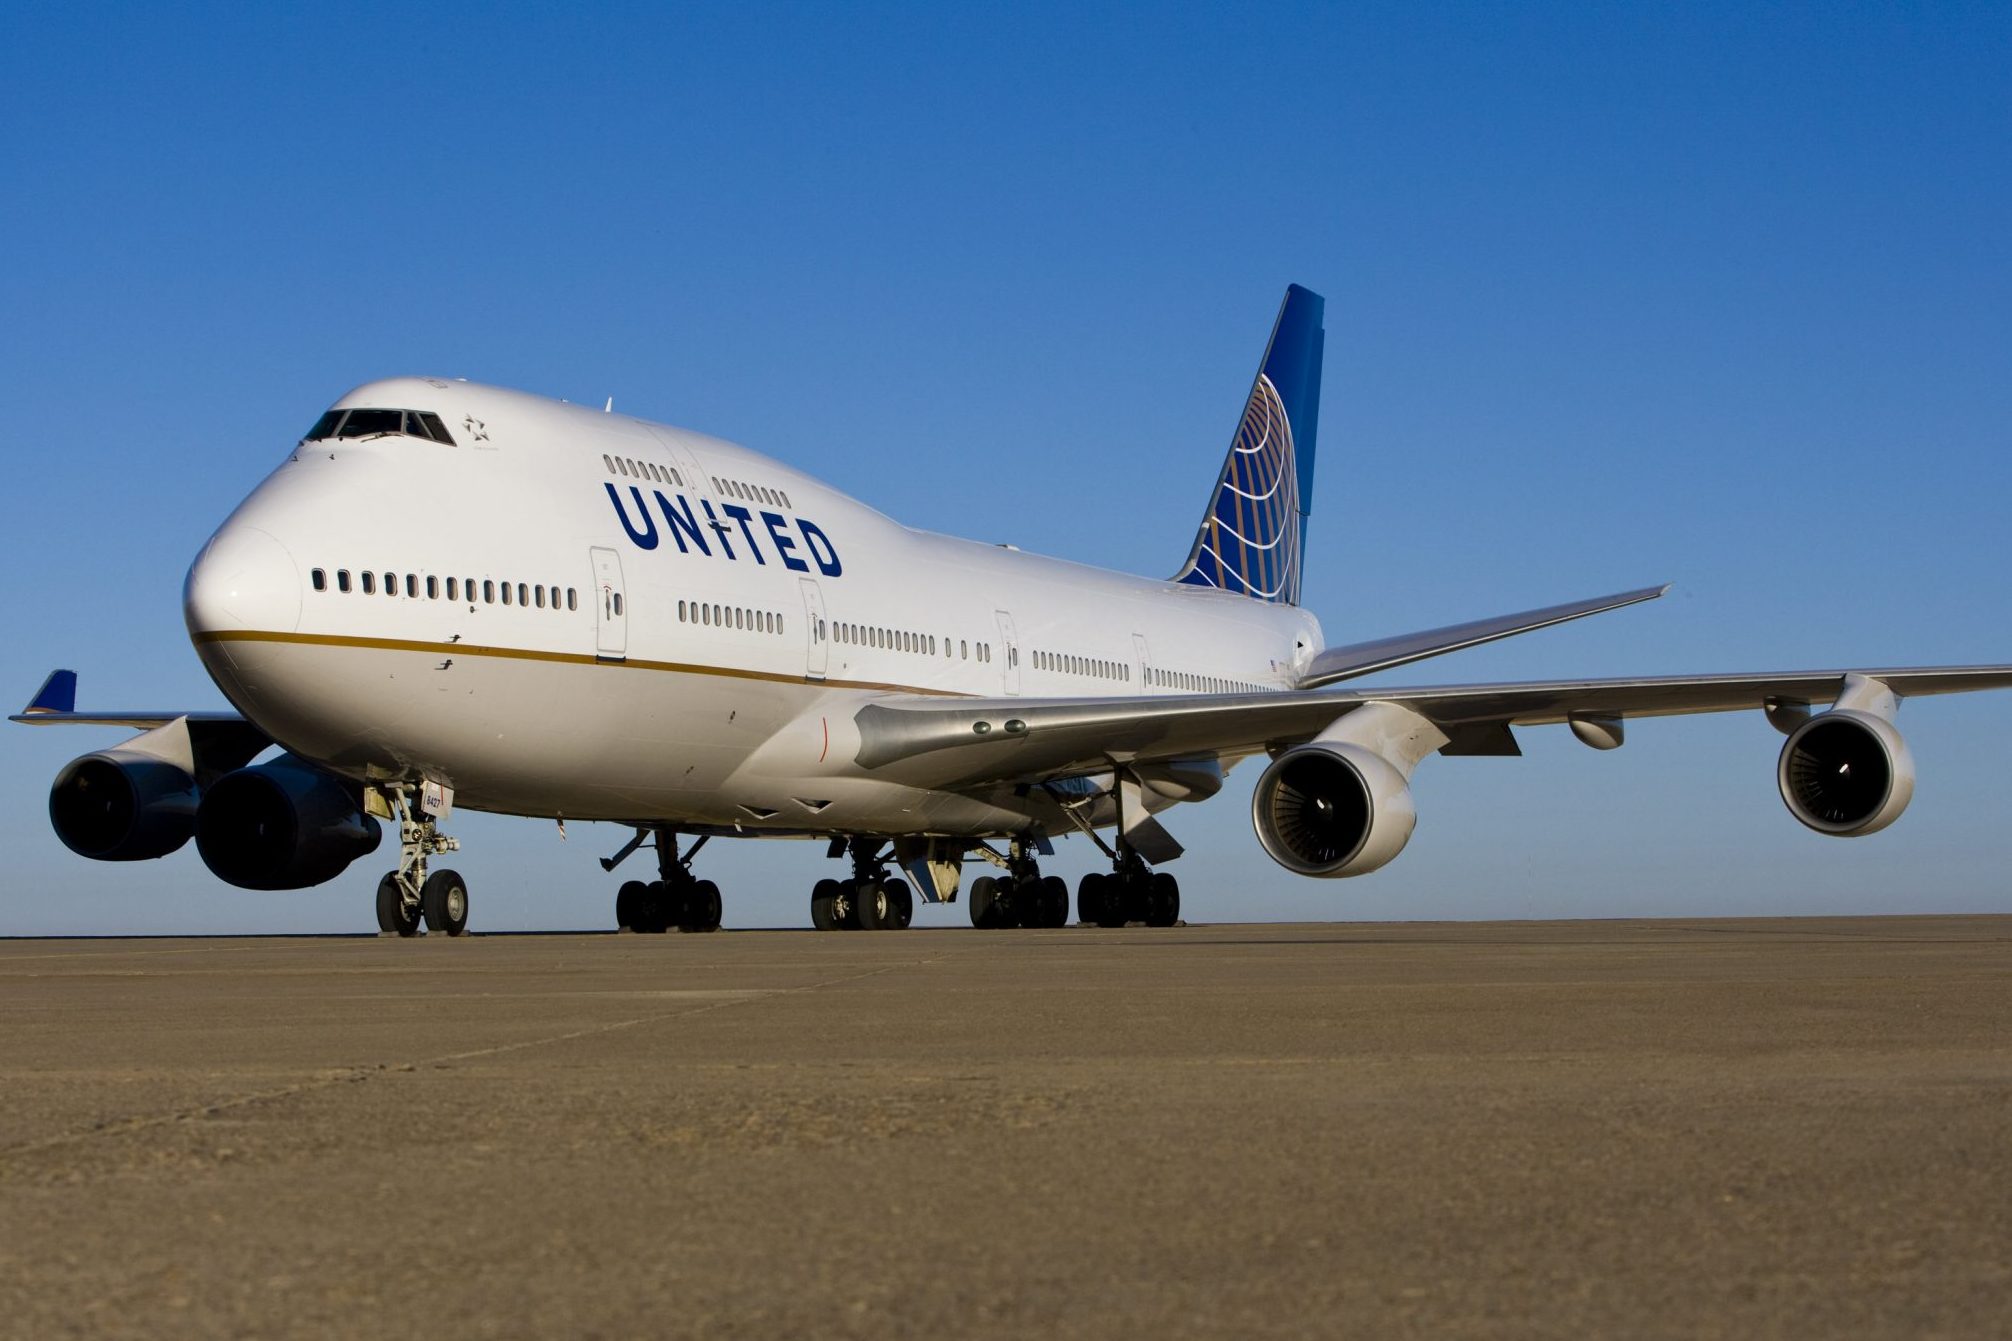 The prominence of Denver as a hub city for United is really starting to come into focus.